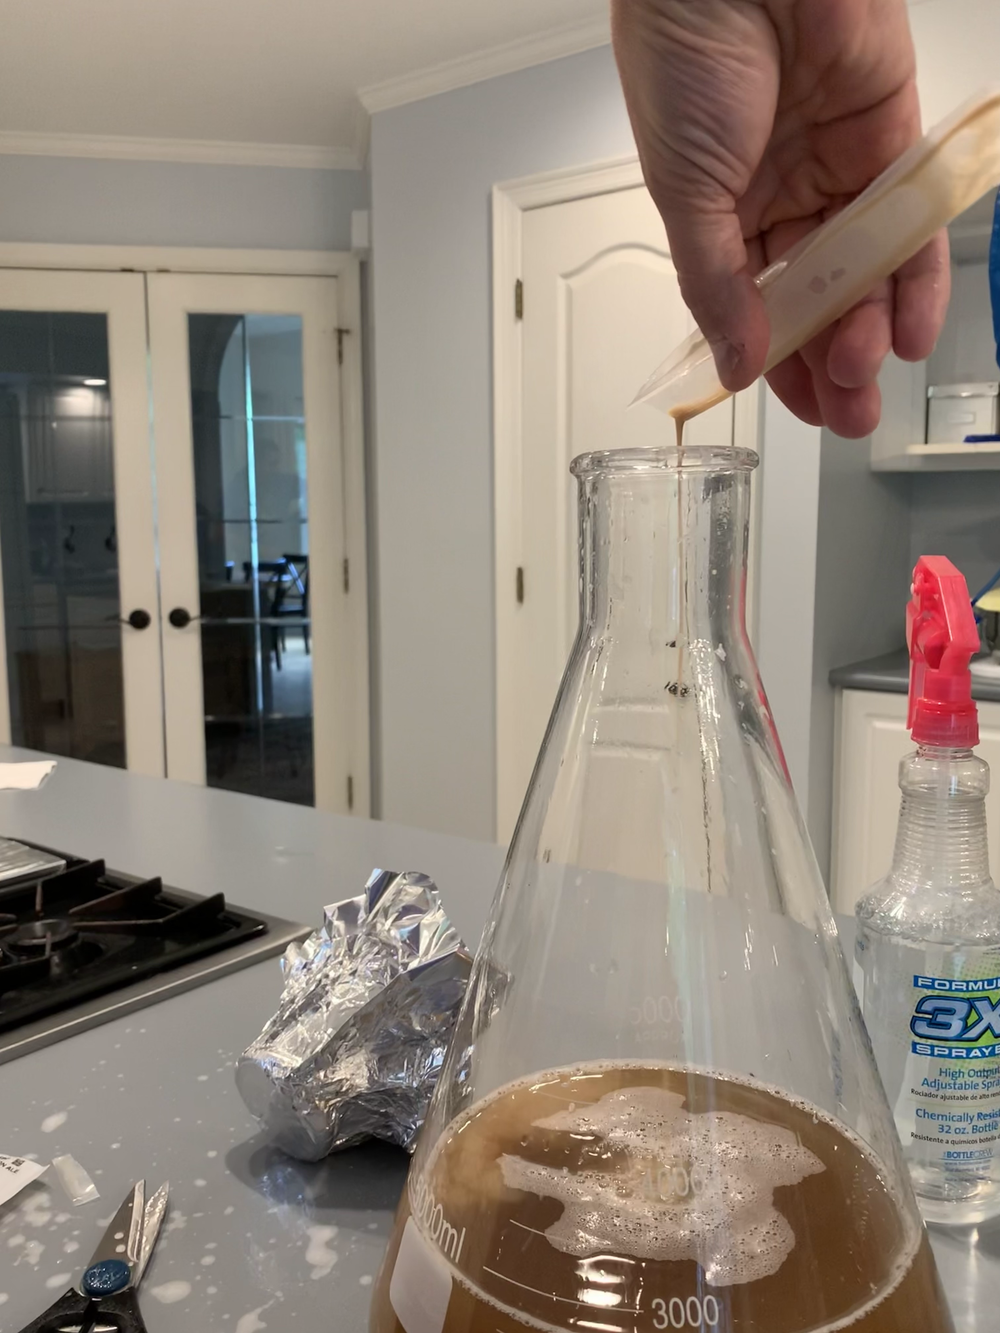  Maida prepares a yeast starter culture with nutrients and liquid yeast in an Erlenmeyer flask. Starter yeast cultures propagate enough yeast cells to meet a beer recipe’s required pitching rate.  Image credit: Laura Elizabeth Palermo. 